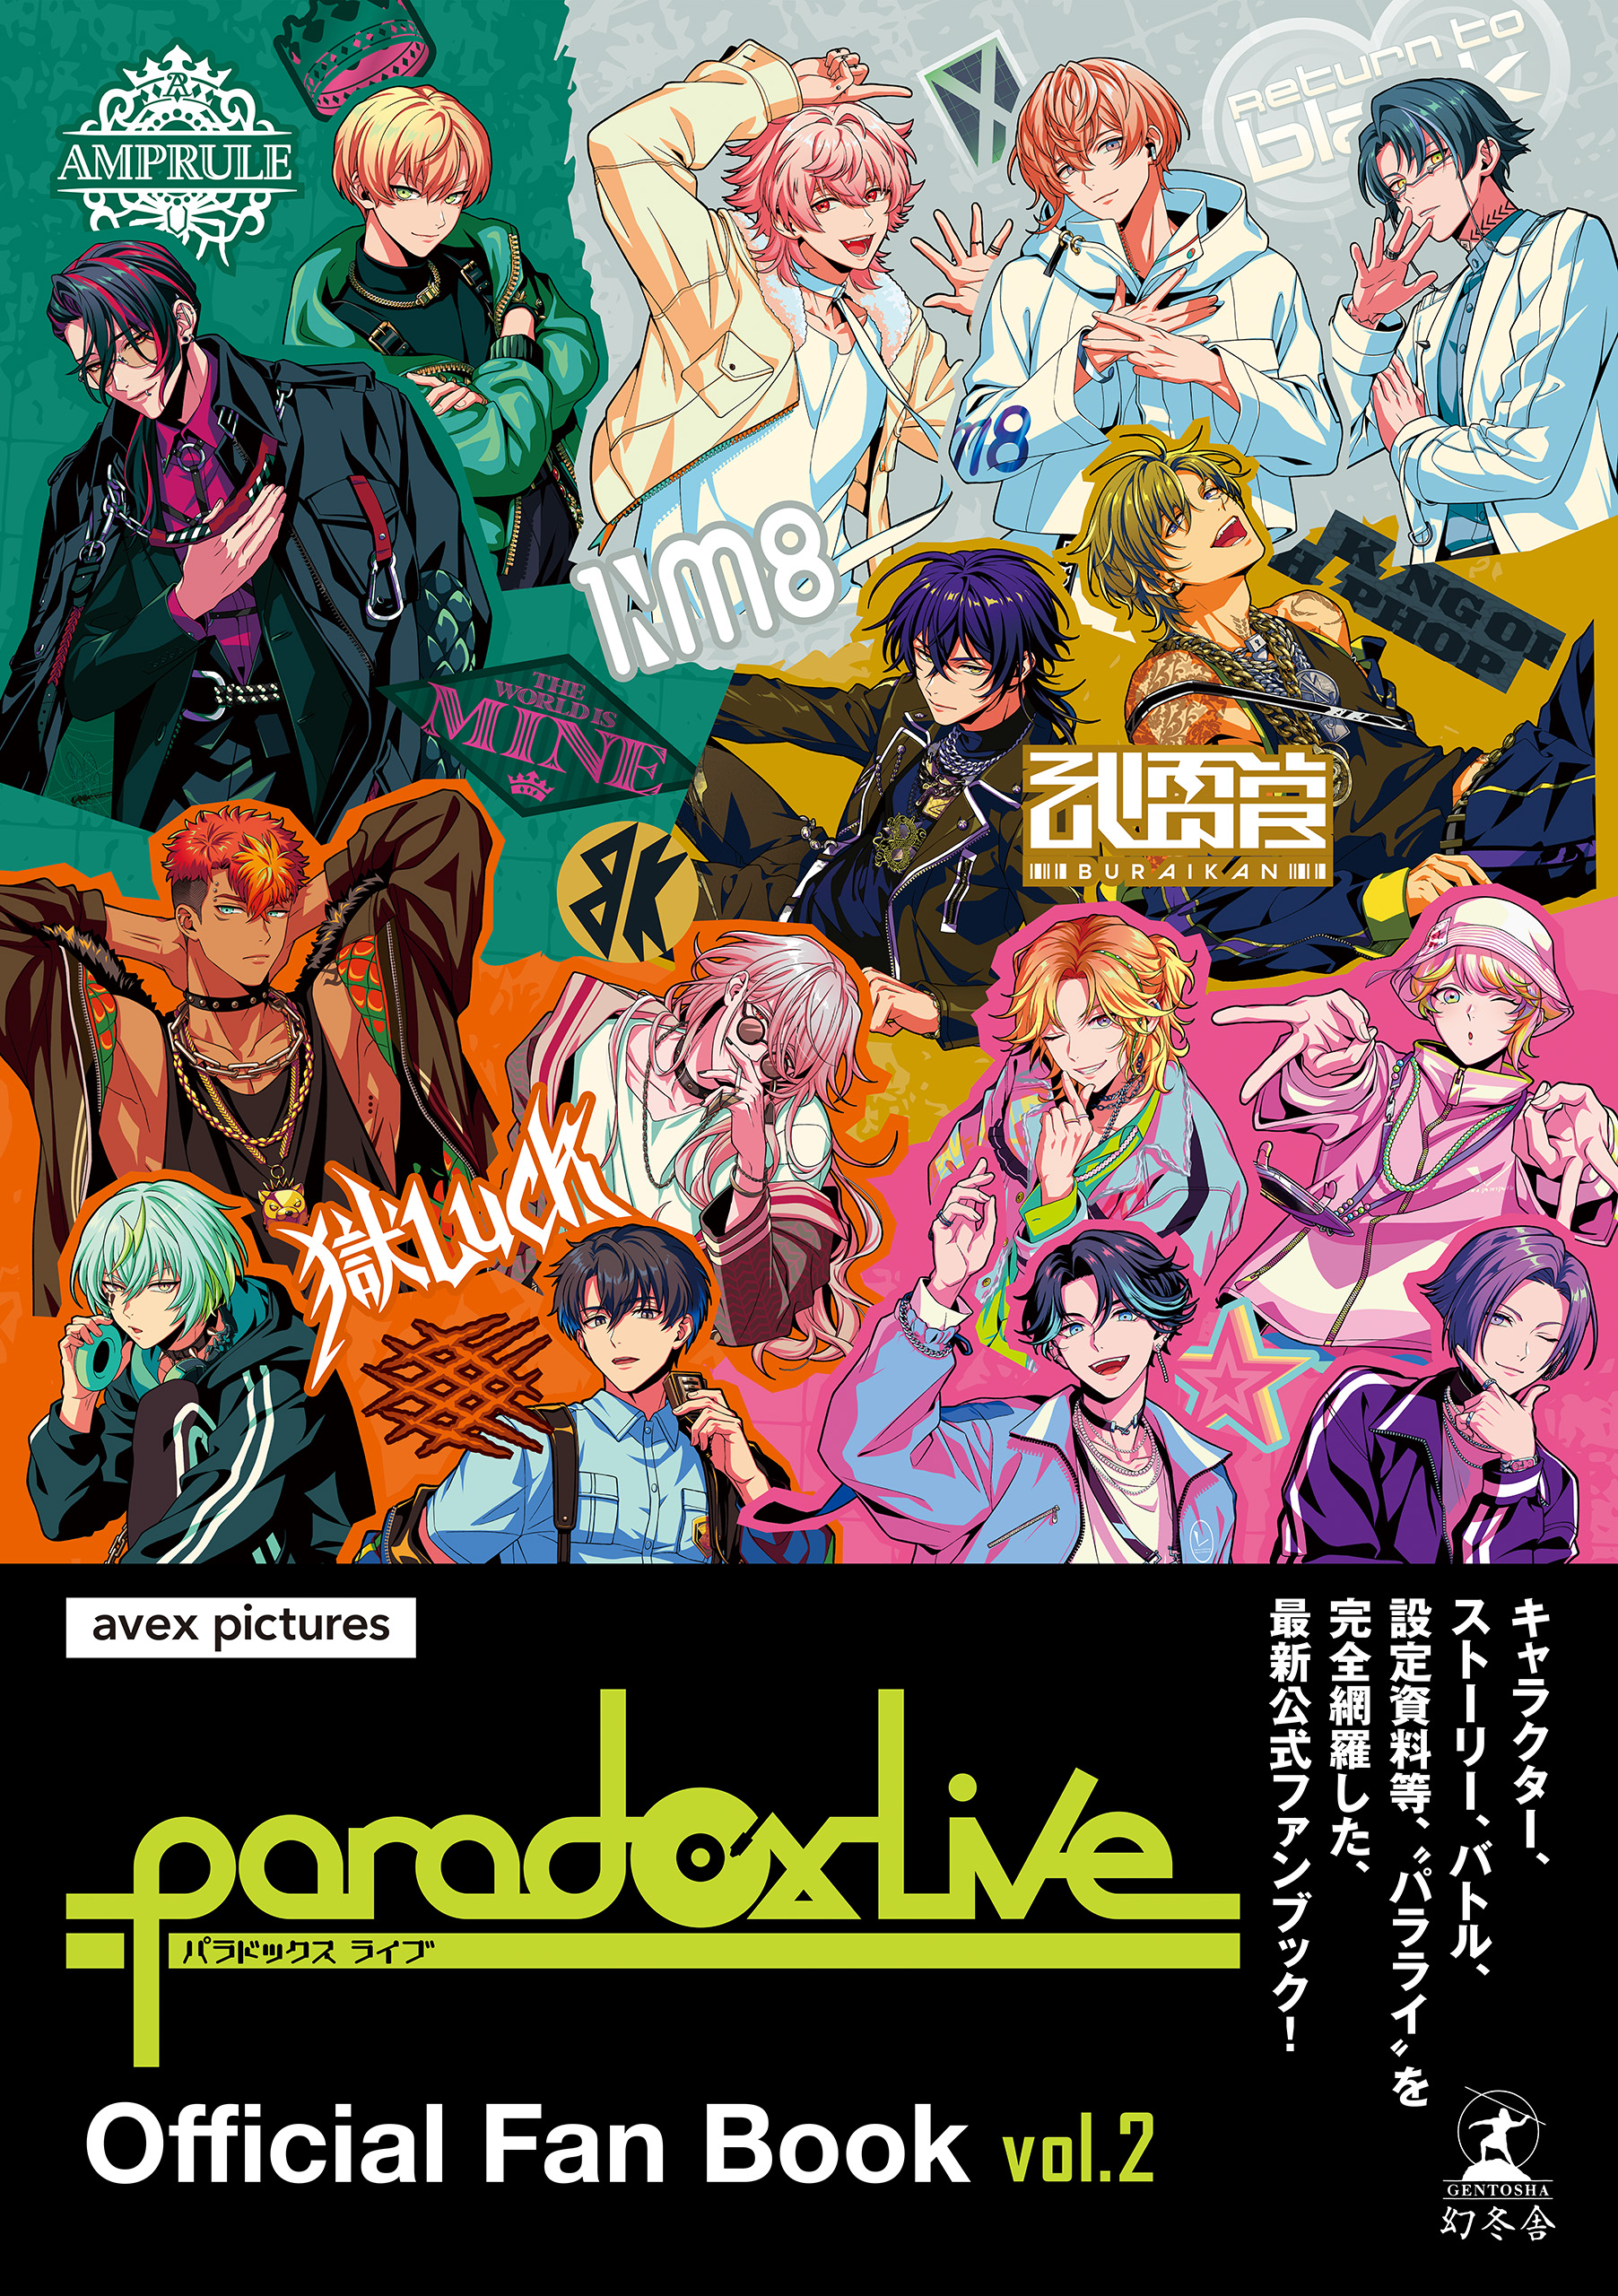 Paradox Live Official Fan Book vol.2（最新刊） - avex pictures/ジークレスト -  ビジネス・実用書・無料試し読みなら、電子書籍・コミックストア ブックライブ